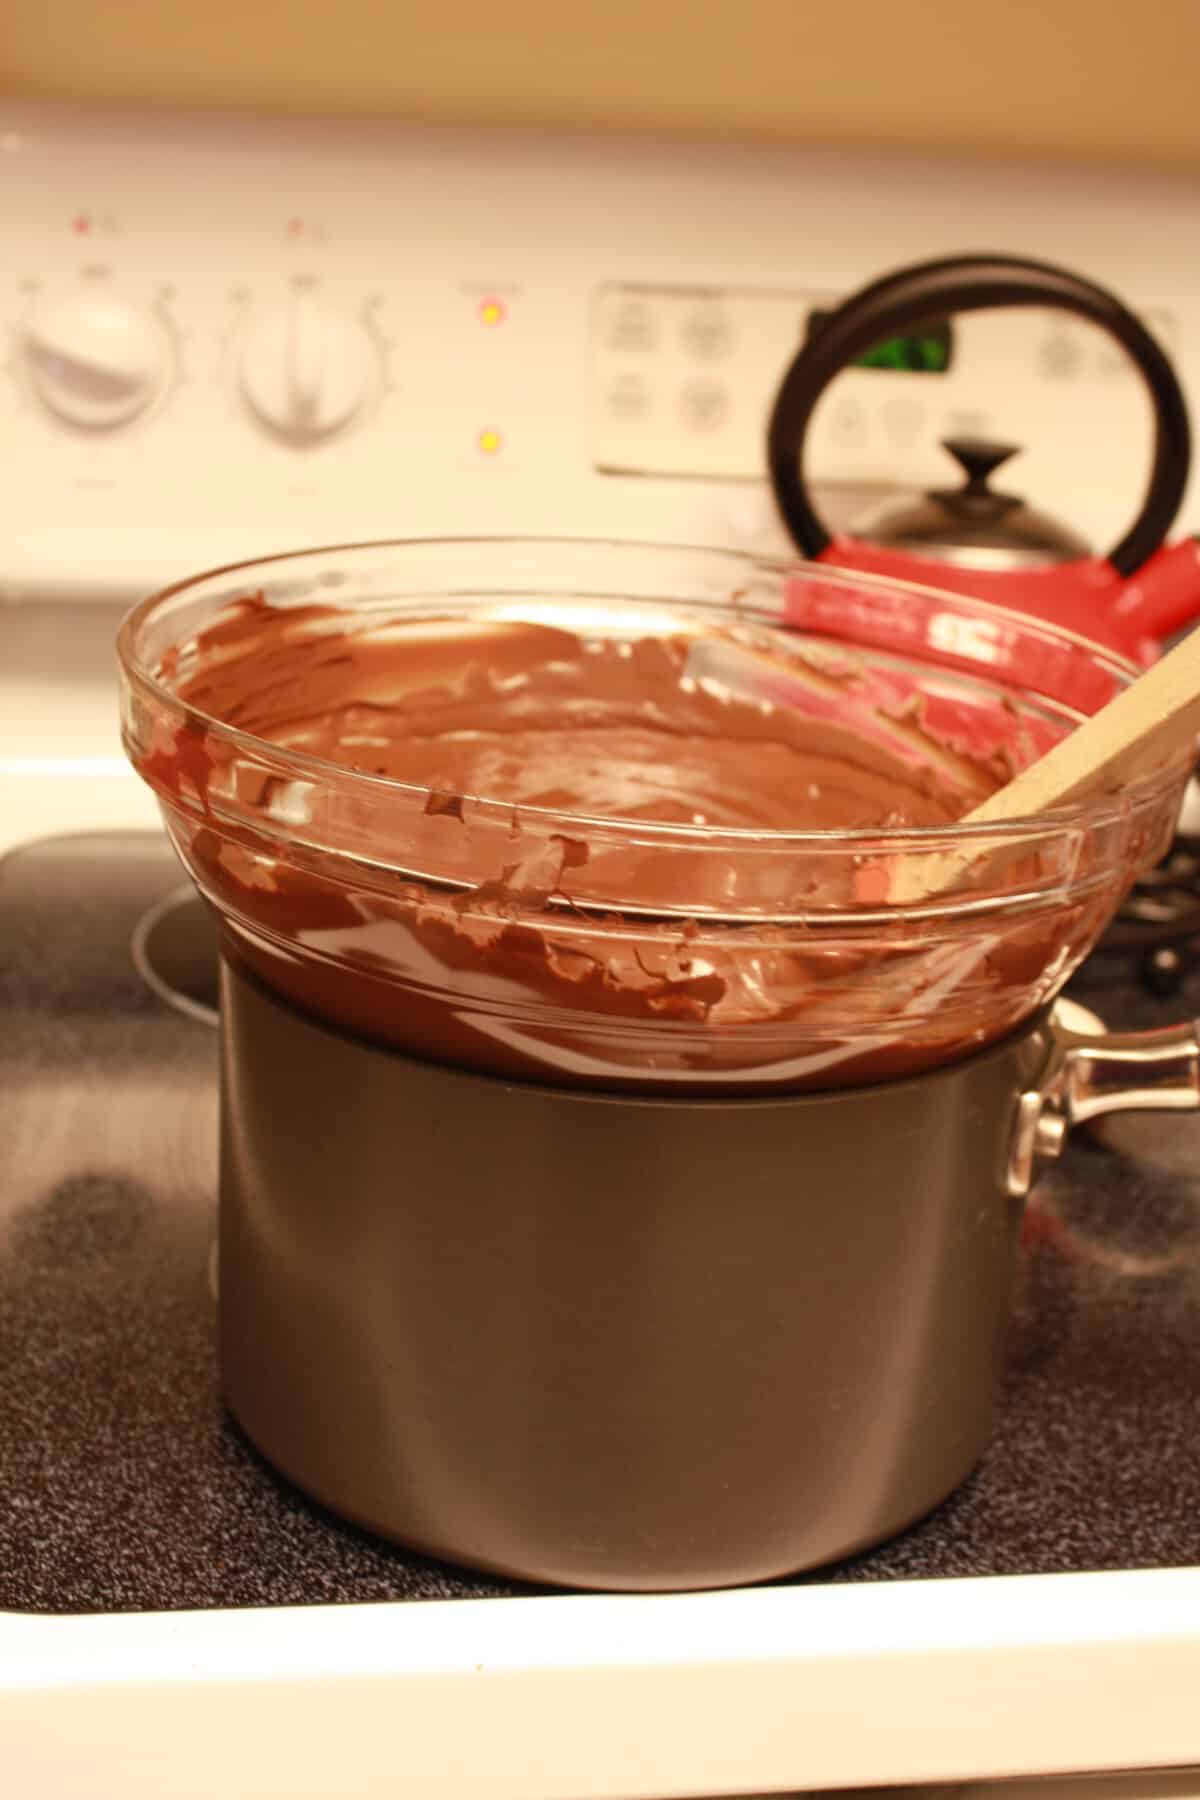 melt chocolate in a glass bowl over a pot of simmering water